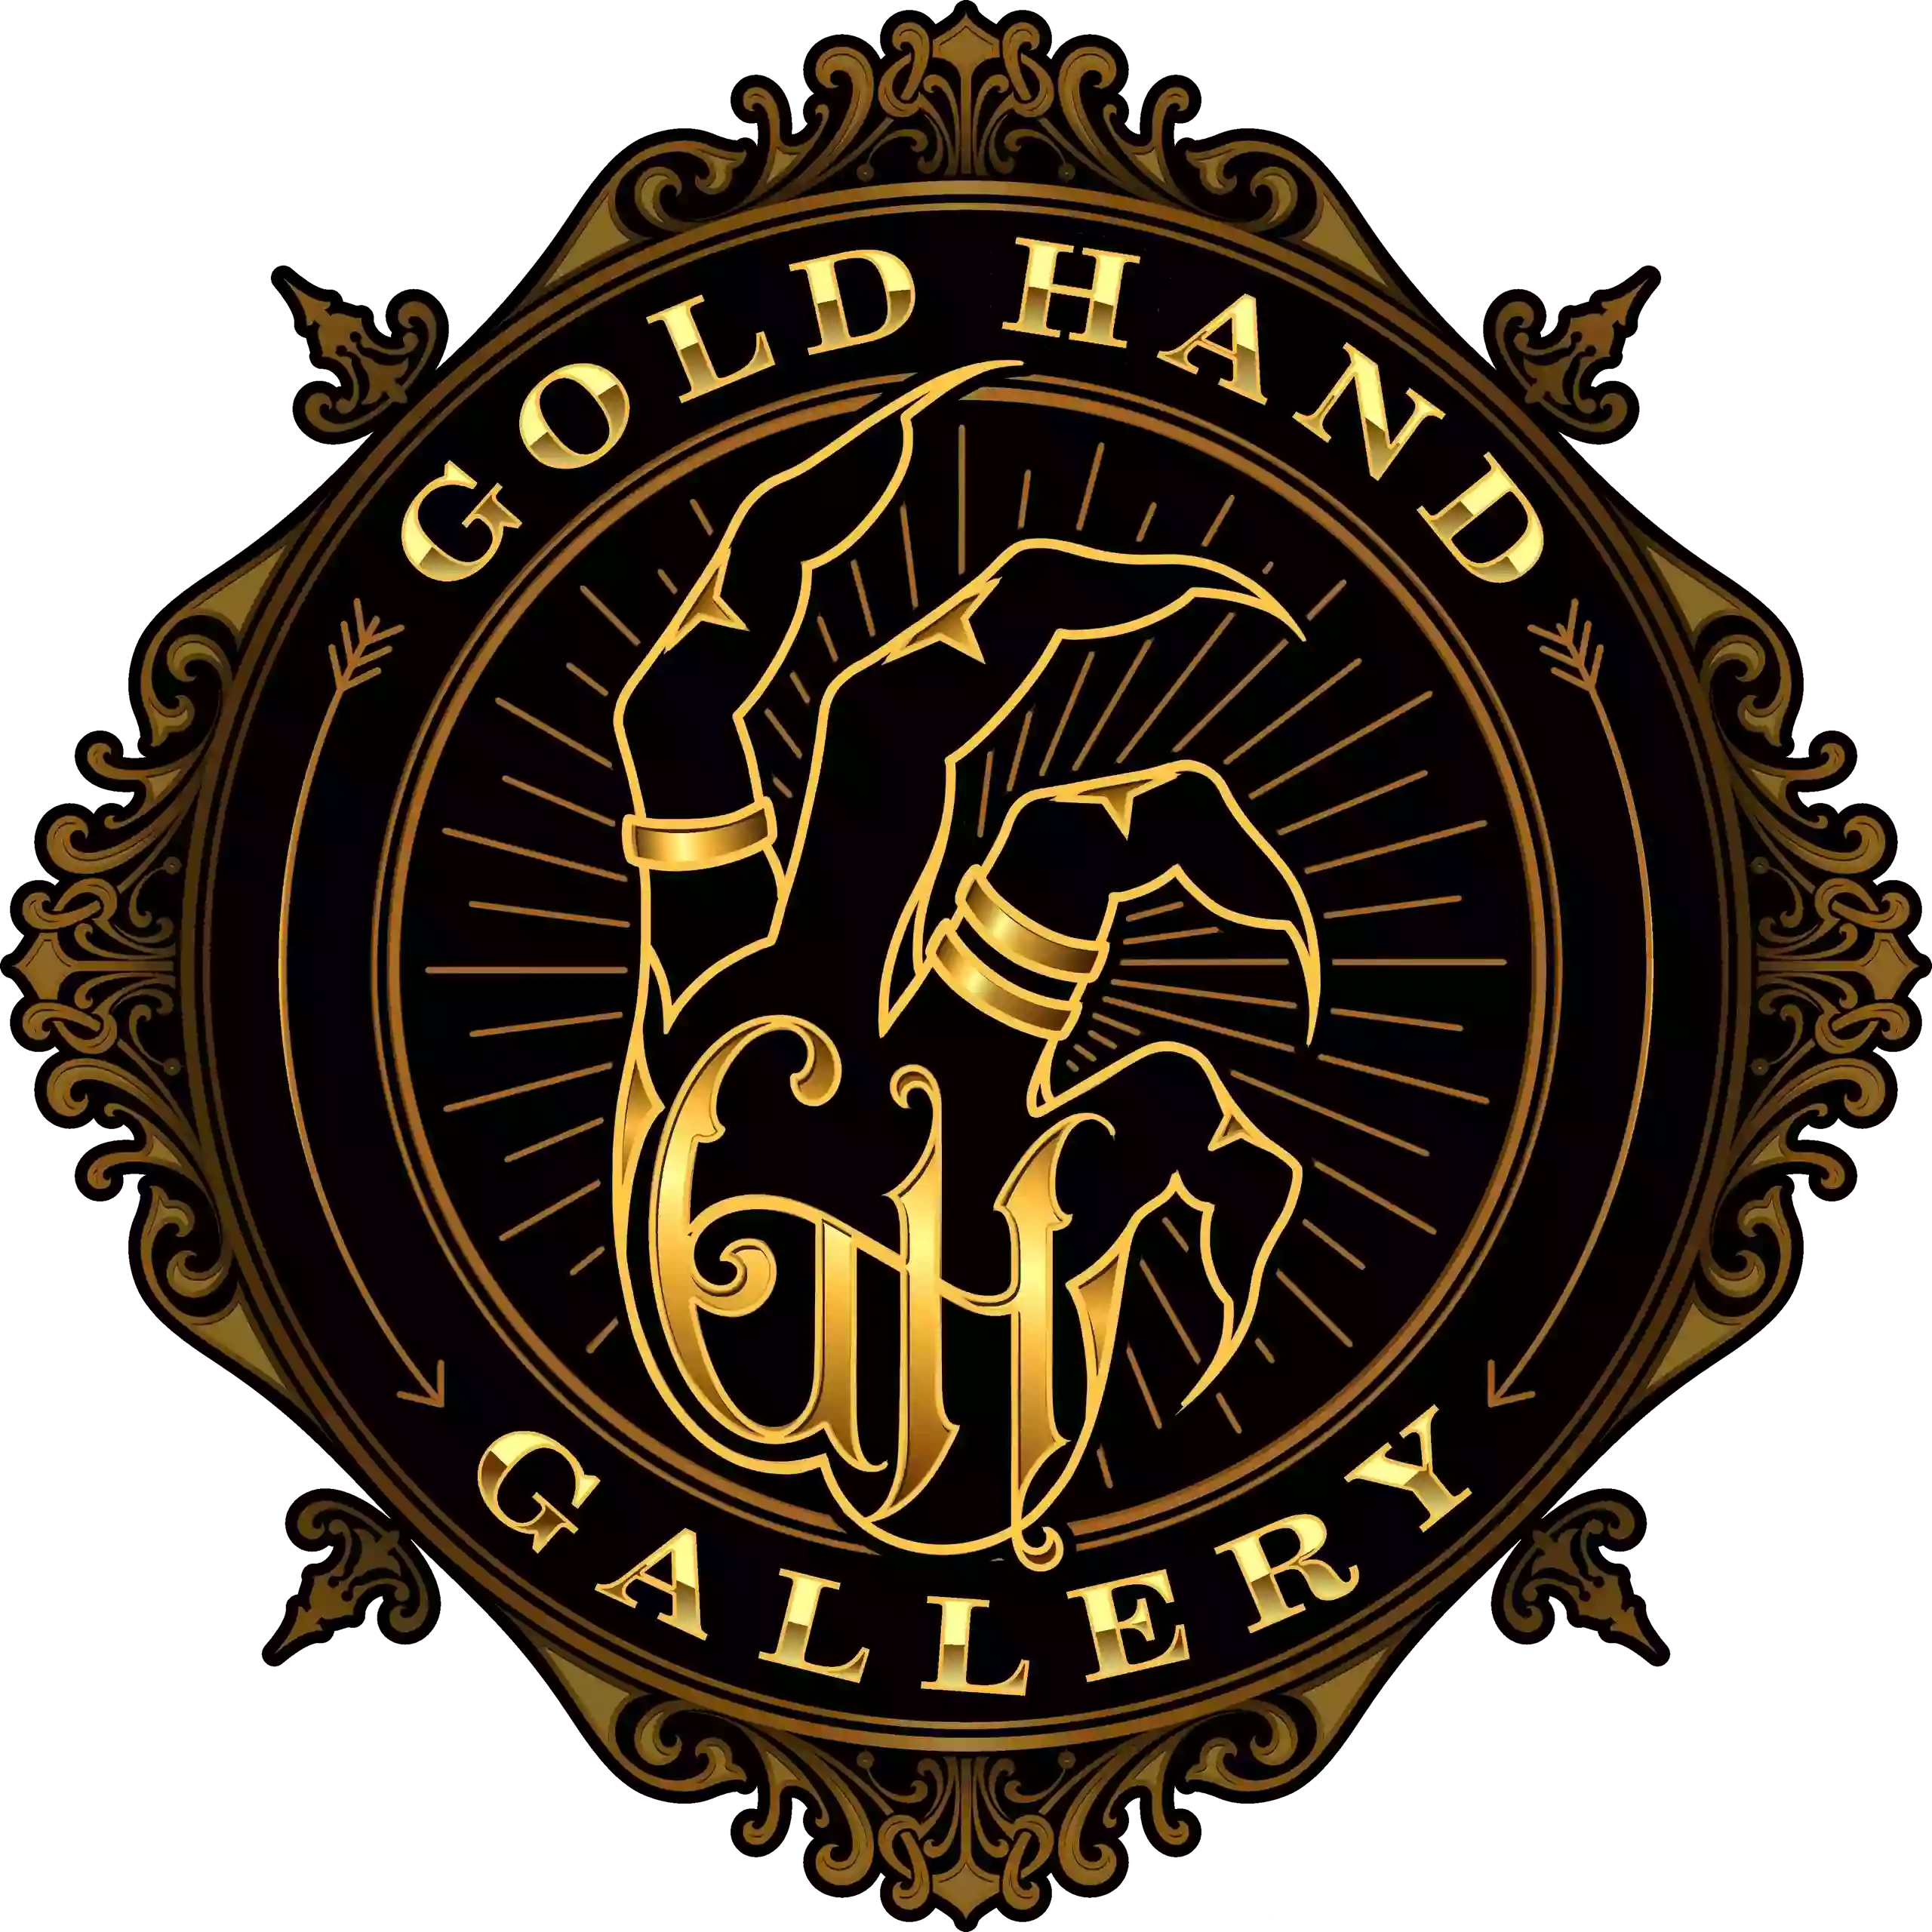 Gold Hand Gallery